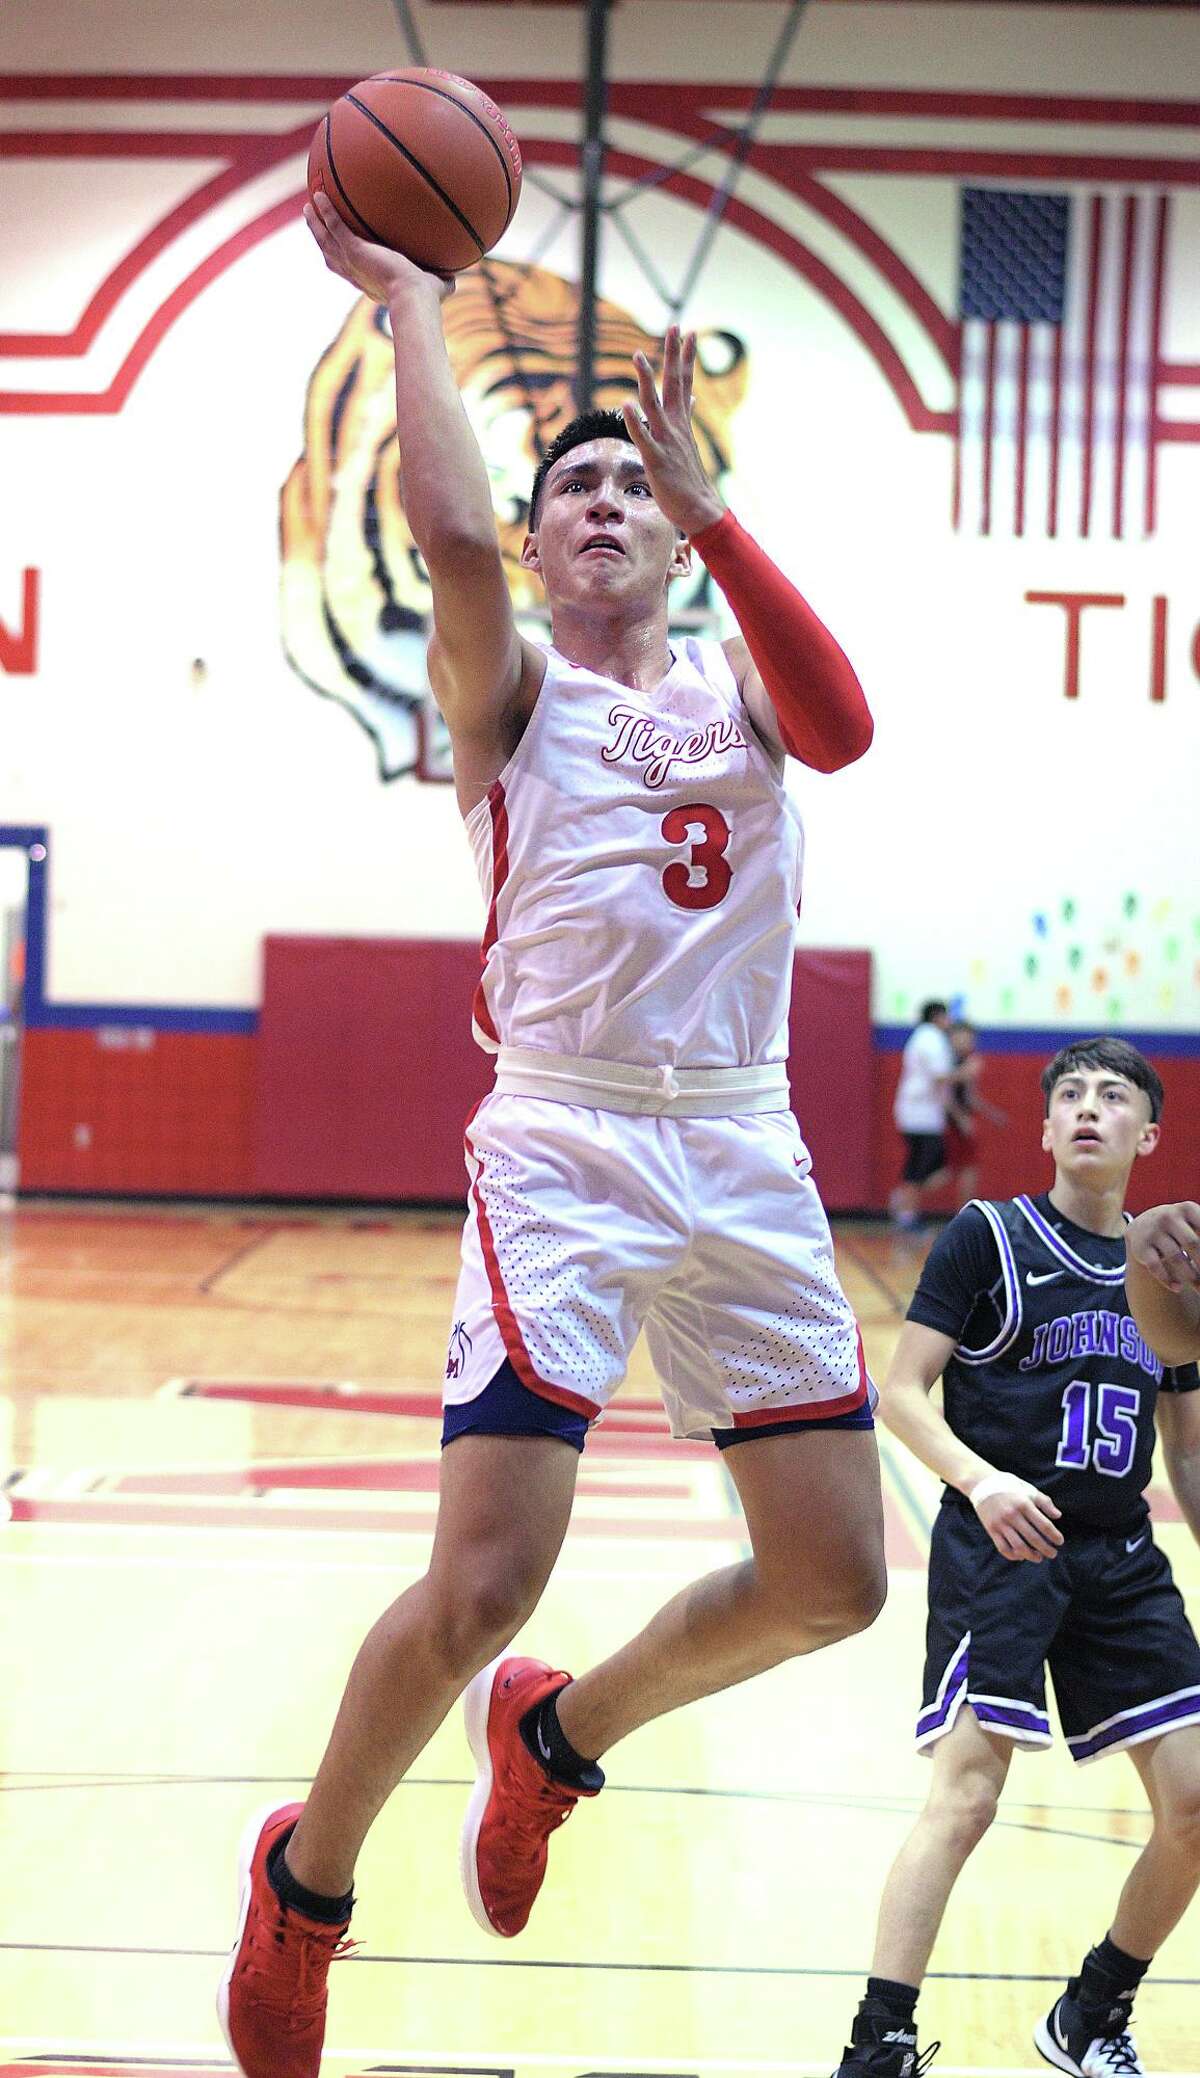 Kevin Garcia drives to the basket for the Martin Tigers as Chris Merino follows the action for the LBJ Wolves Tuesday, November 19, 2019 at the Roberto J. Flores Gymnasium at Martin High School.